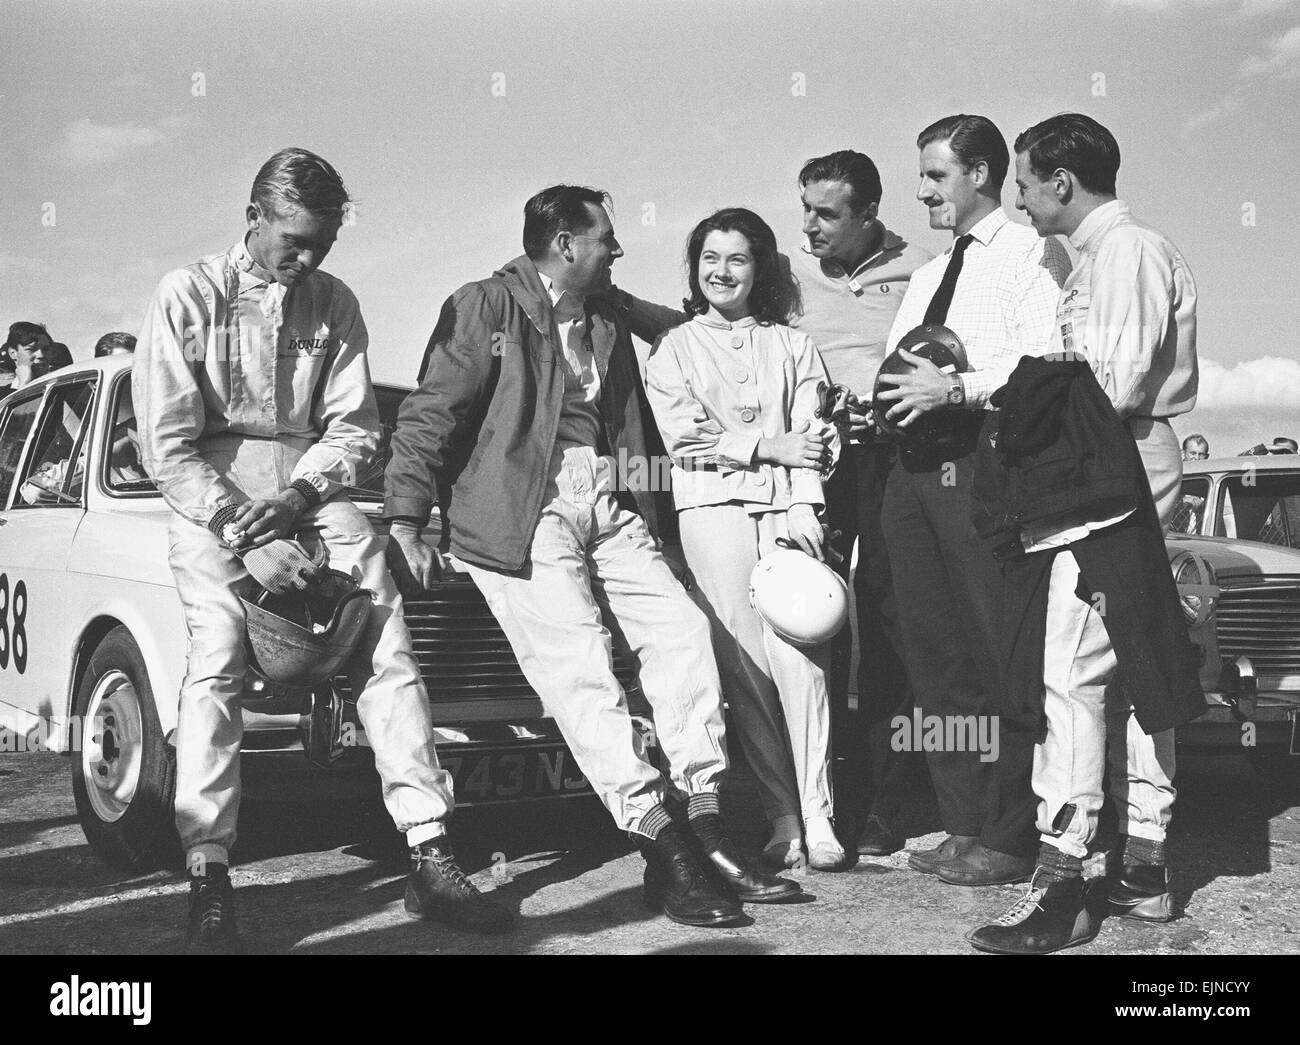 Pictured before the start of the Molyslip trophy race at Snetterton, Christabel Carlisle is seen here with some of the world's best male drivers. Left to right; Tony Maggs, Jack Brabham, Christable Carlisle, Roy Salvadoi, Graham Hill and Tony Marsh. 29th September 1962 *** Local Caption *** watscan - - 28/05/2010 Stock Photo